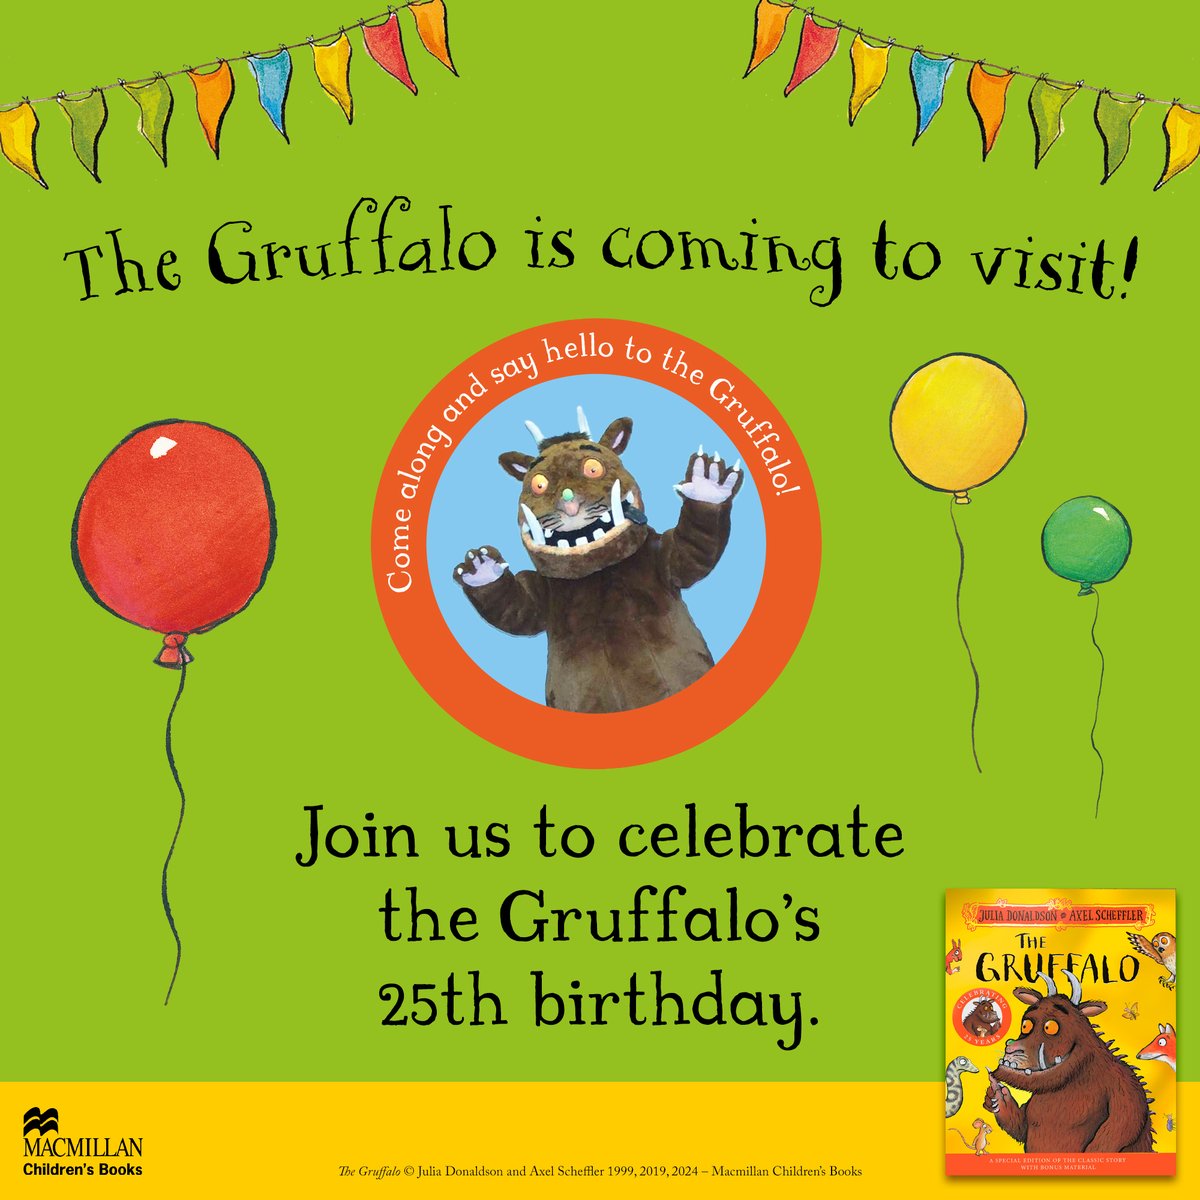 We have some VERY exciting news... the Gruffalo is visiting NCBC on Wednesday 22nd May! 😍 Join us from 2:45pm to say hello to every young child's favourite the Gruffalo. More details to follow, watch this space! 👀